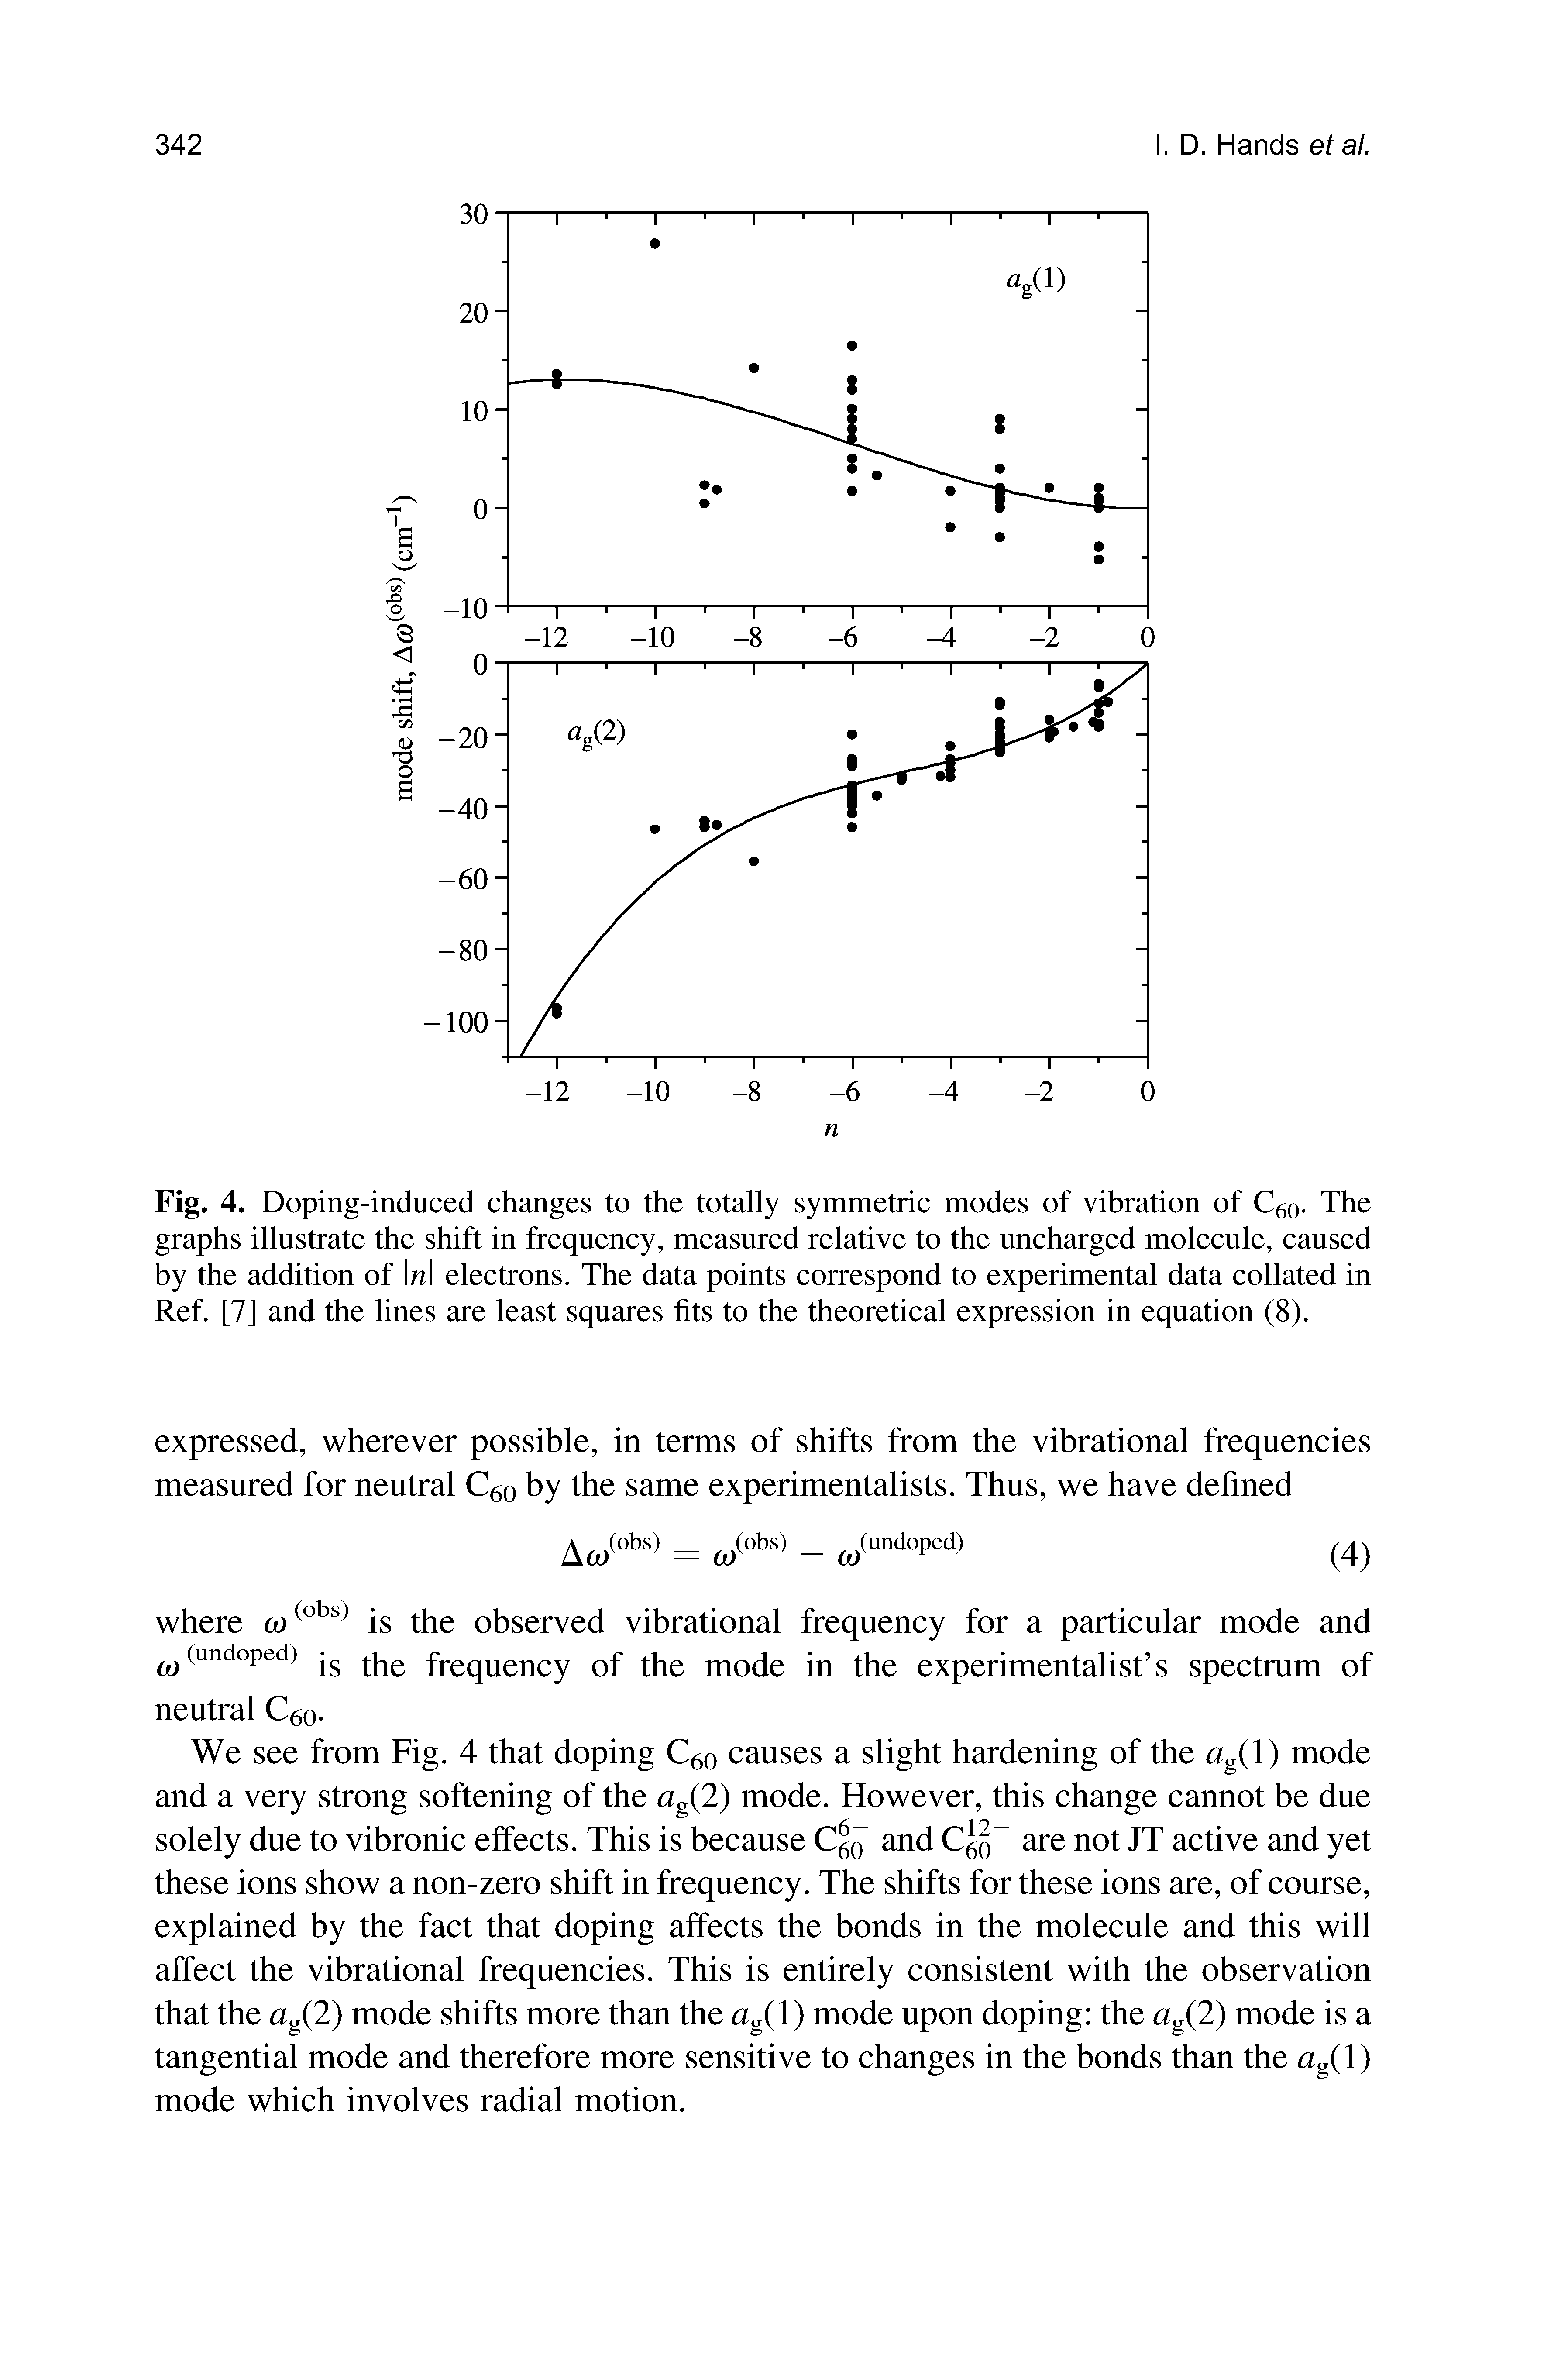 Fig. 4. Doping-induced changes to the totally symmetric modes of vibration of C60. The graphs illustrate the shift in frequency, measured relative to the uncharged molecule, caused by the addition of n electrons. The data points correspond to experimental data collated in Ref. [7] and the lines are least squares fits to the theoretical expression in equation (8).